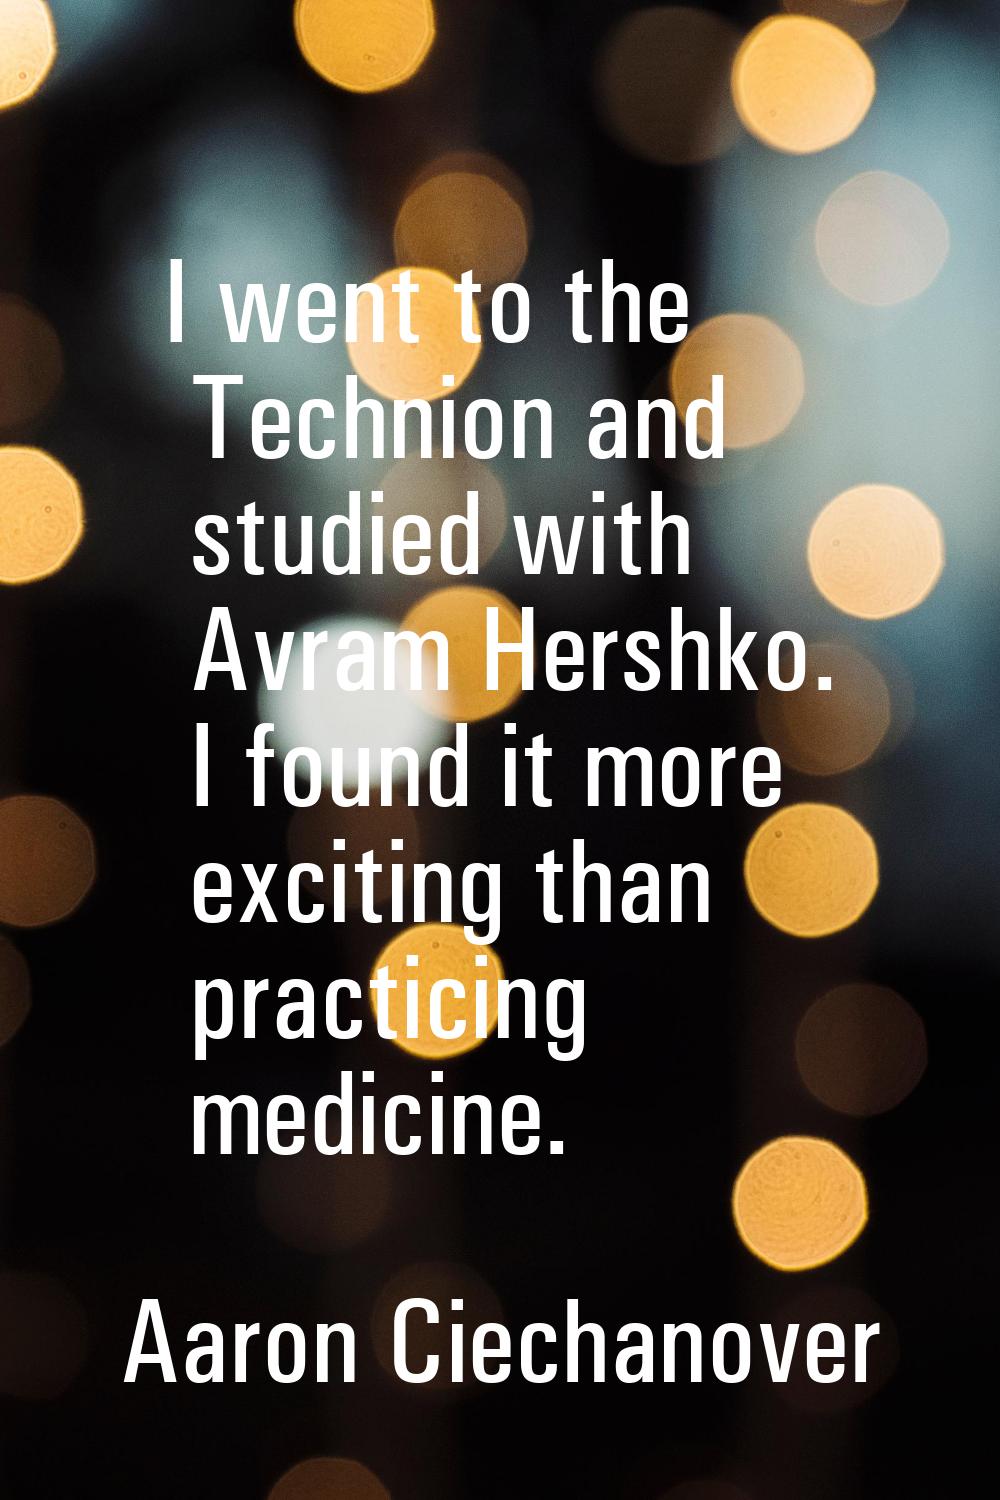 I went to the Technion and studied with Avram Hershko. I found it more exciting than practicing med